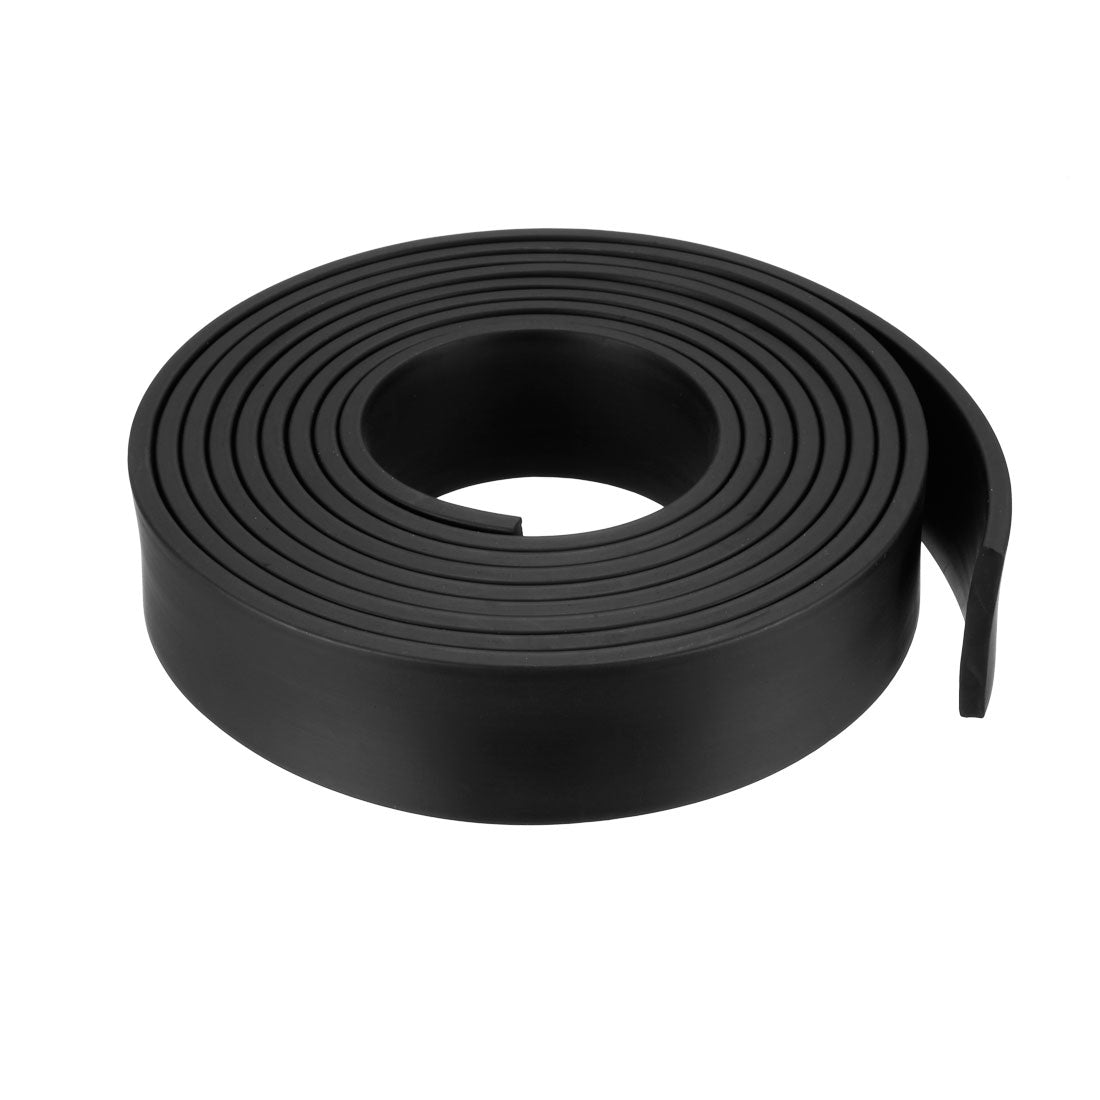 uxcell Uxcell Solid Rectangle Rubber Seal Strip 35mm Wide 5mm Thick, 3 Meters Long Black